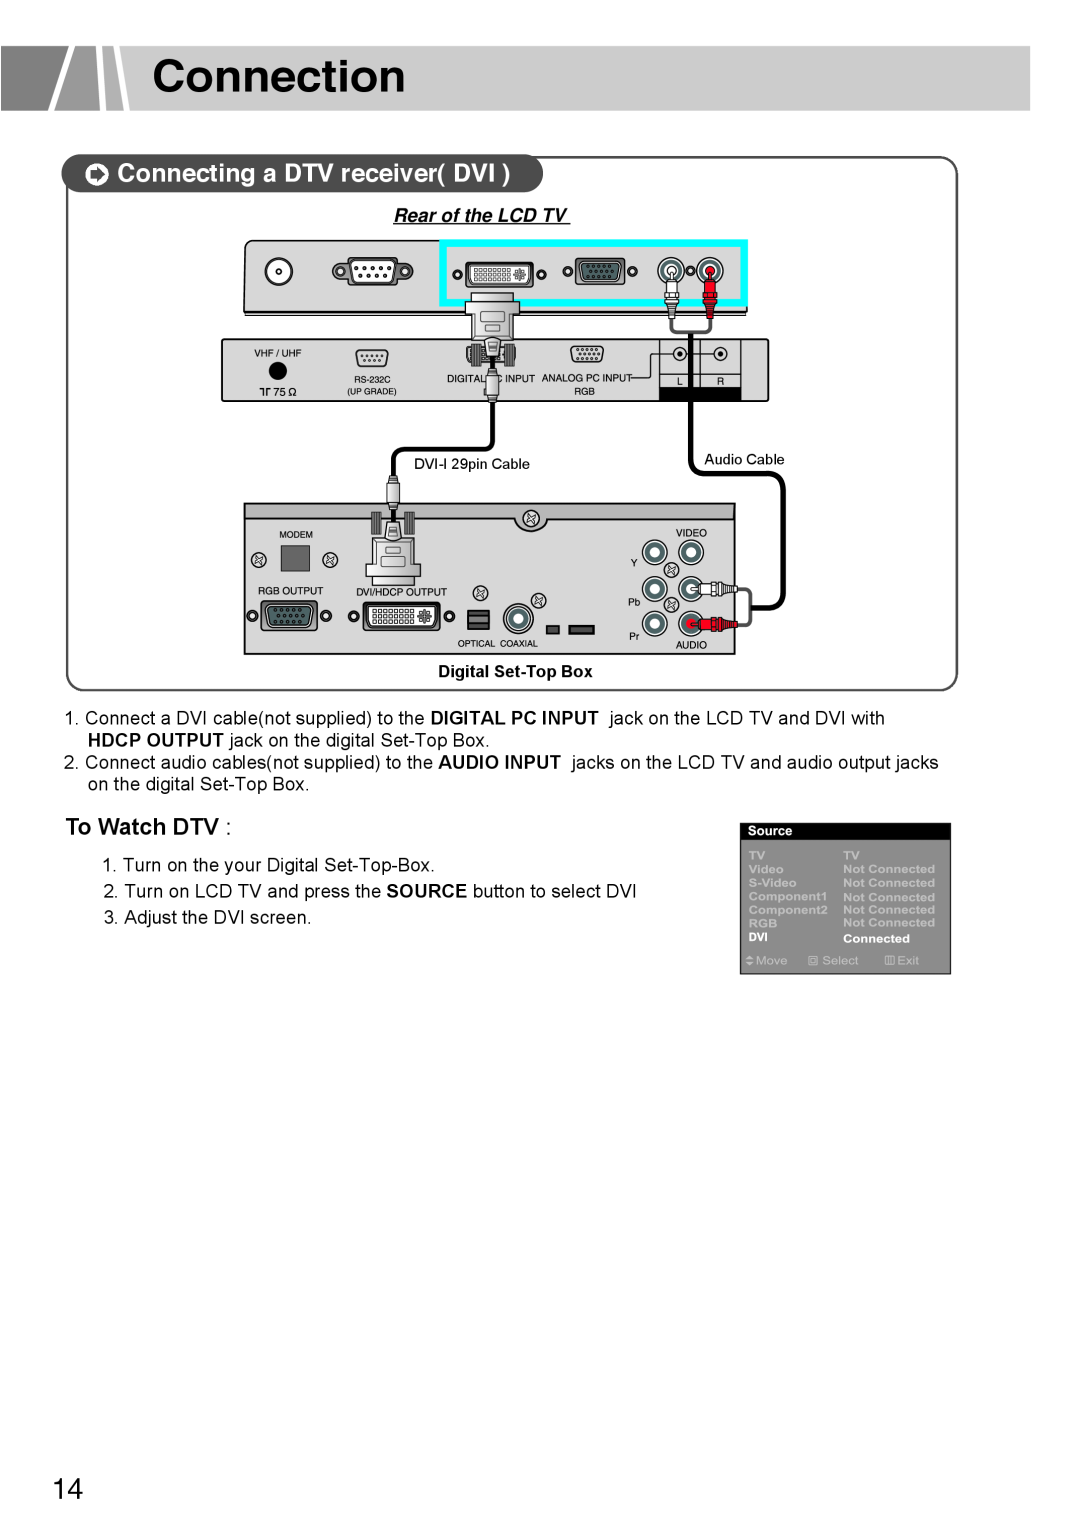 Humax L3040 owner manual Connecting a DTV receiver DVI, Connection, To Watch DTV, Rear of the LCD TV 